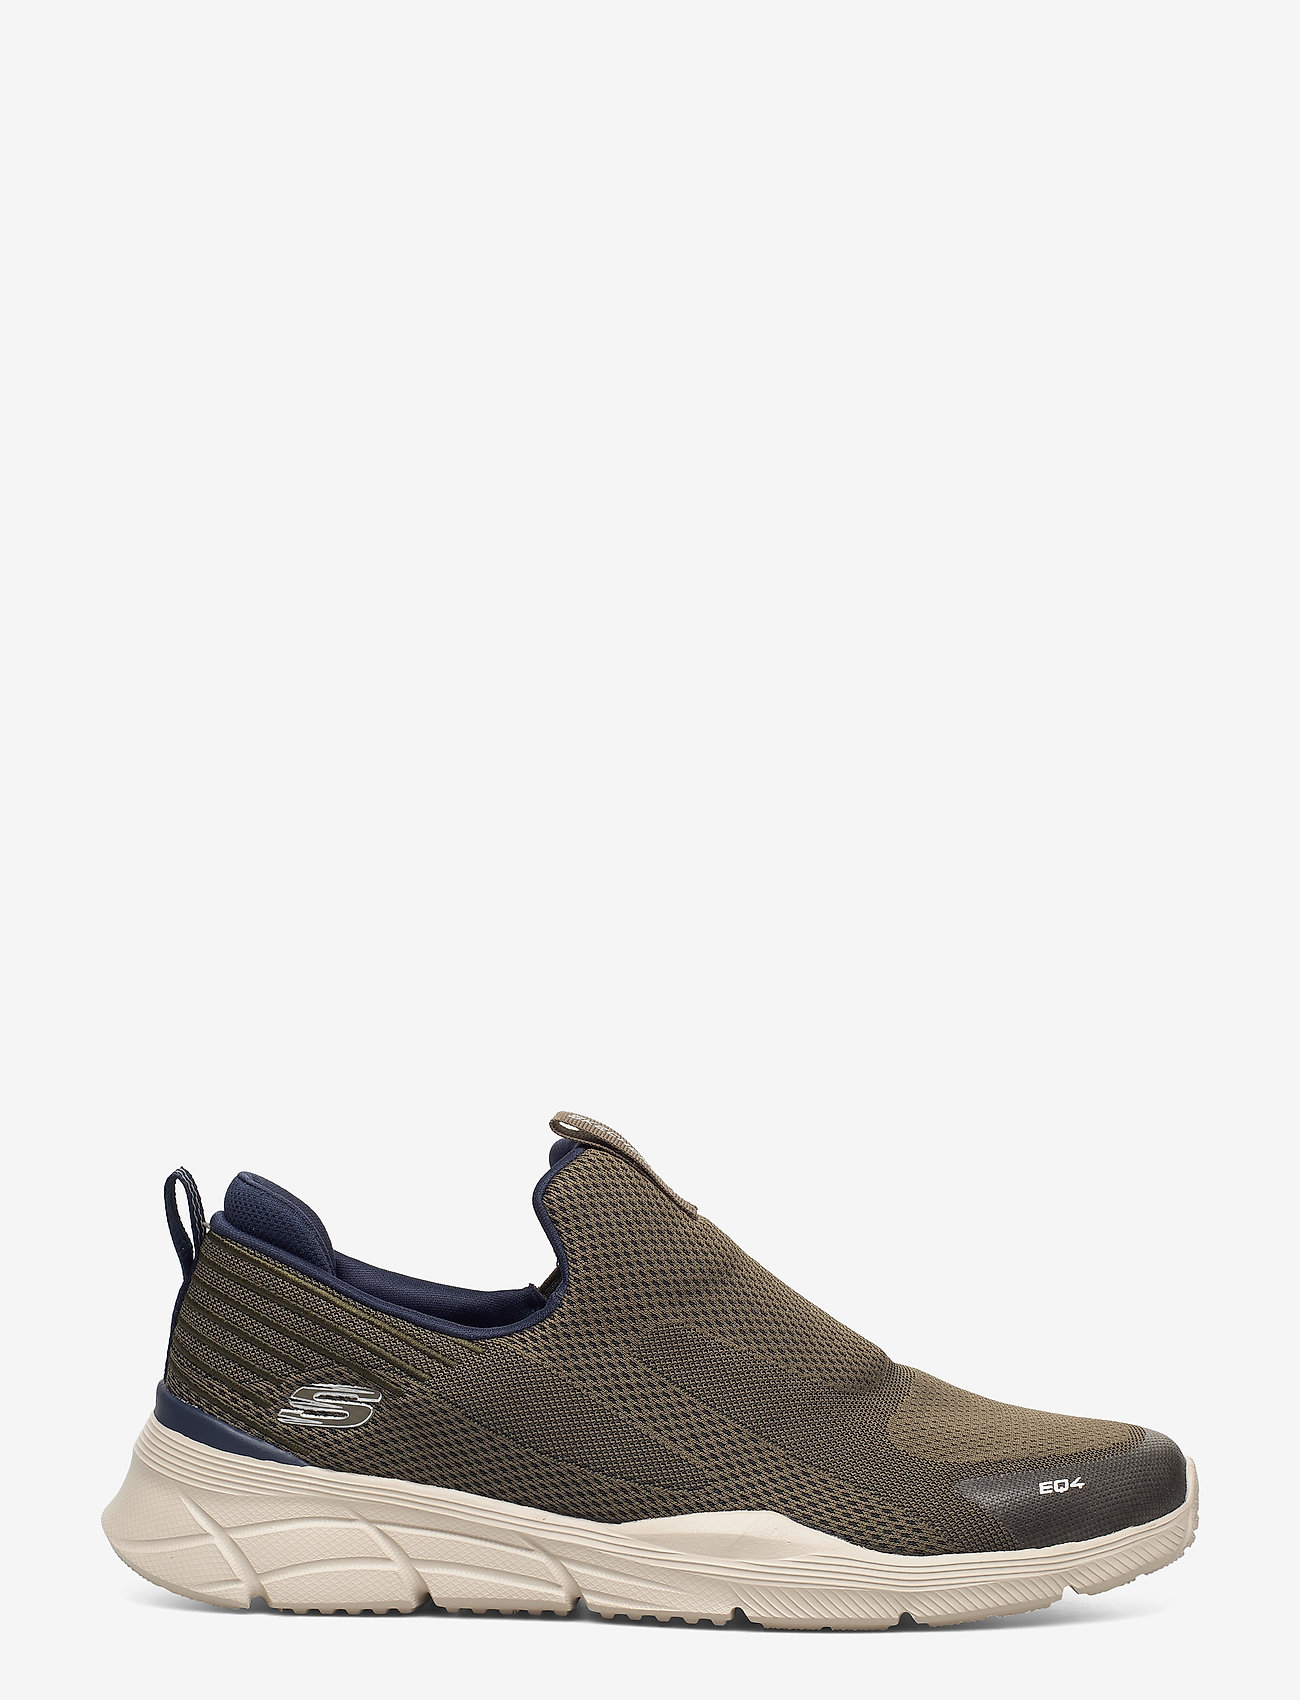 skechers relaxed fit spectrum dabble